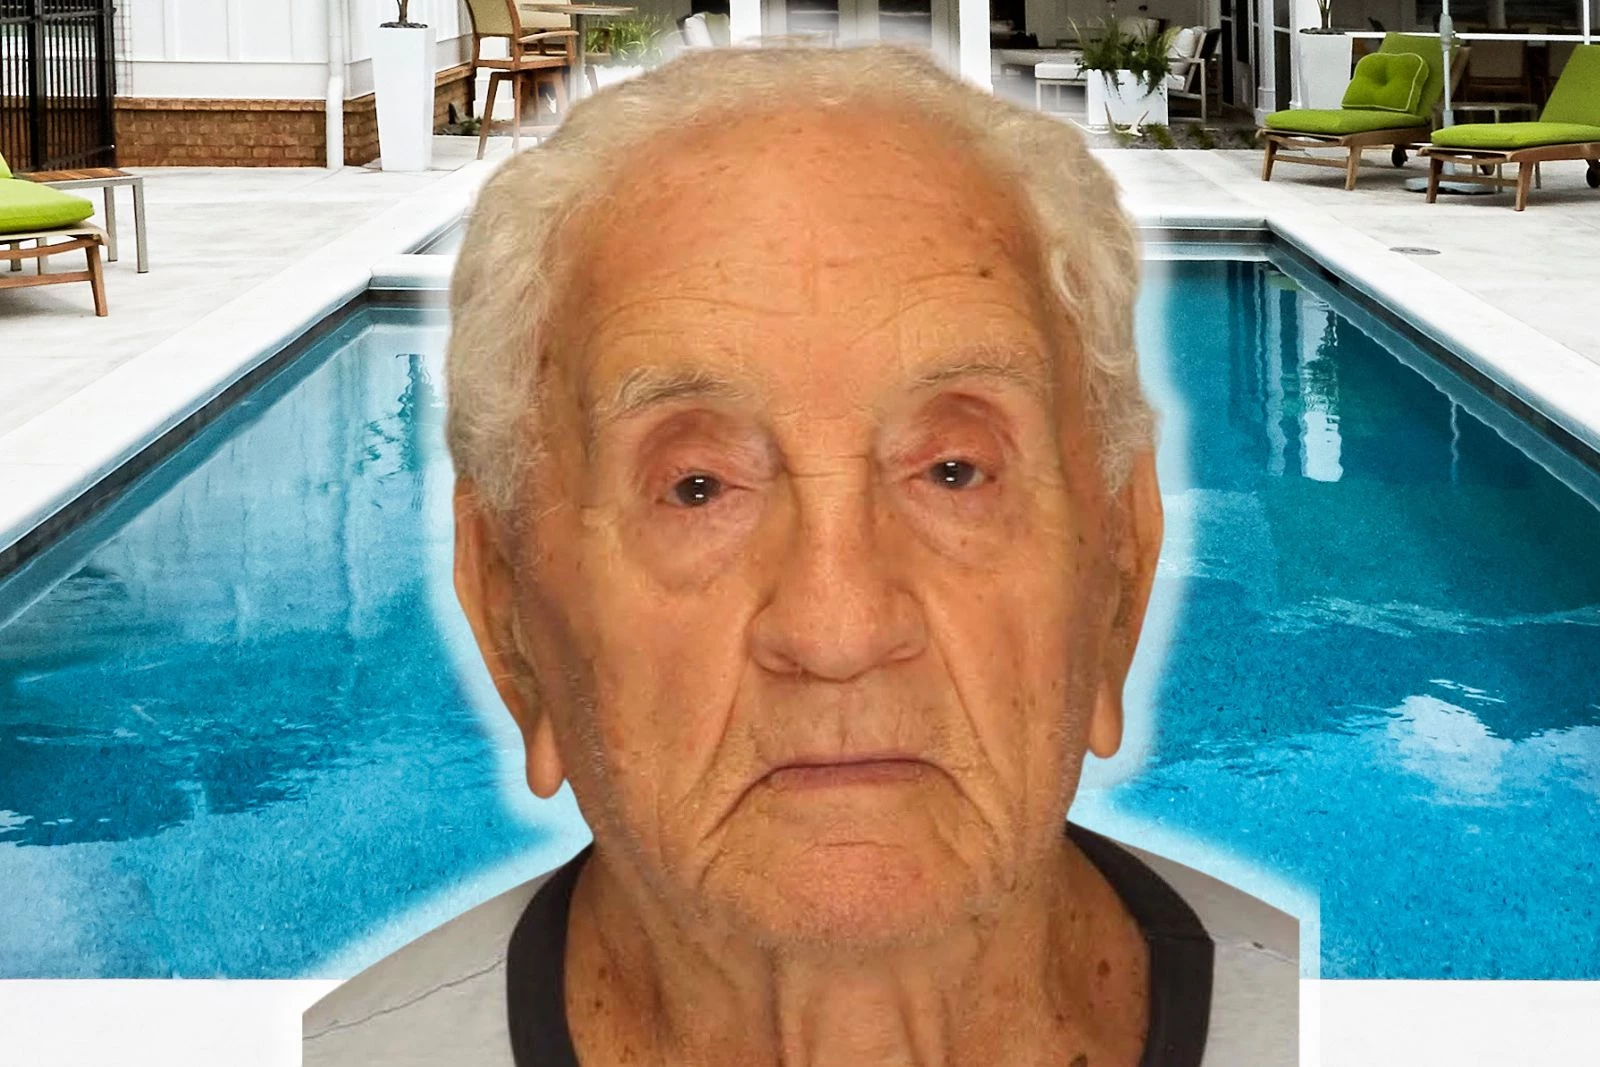 Deal, NJ man, 86, gets no prison for molesting child for decade